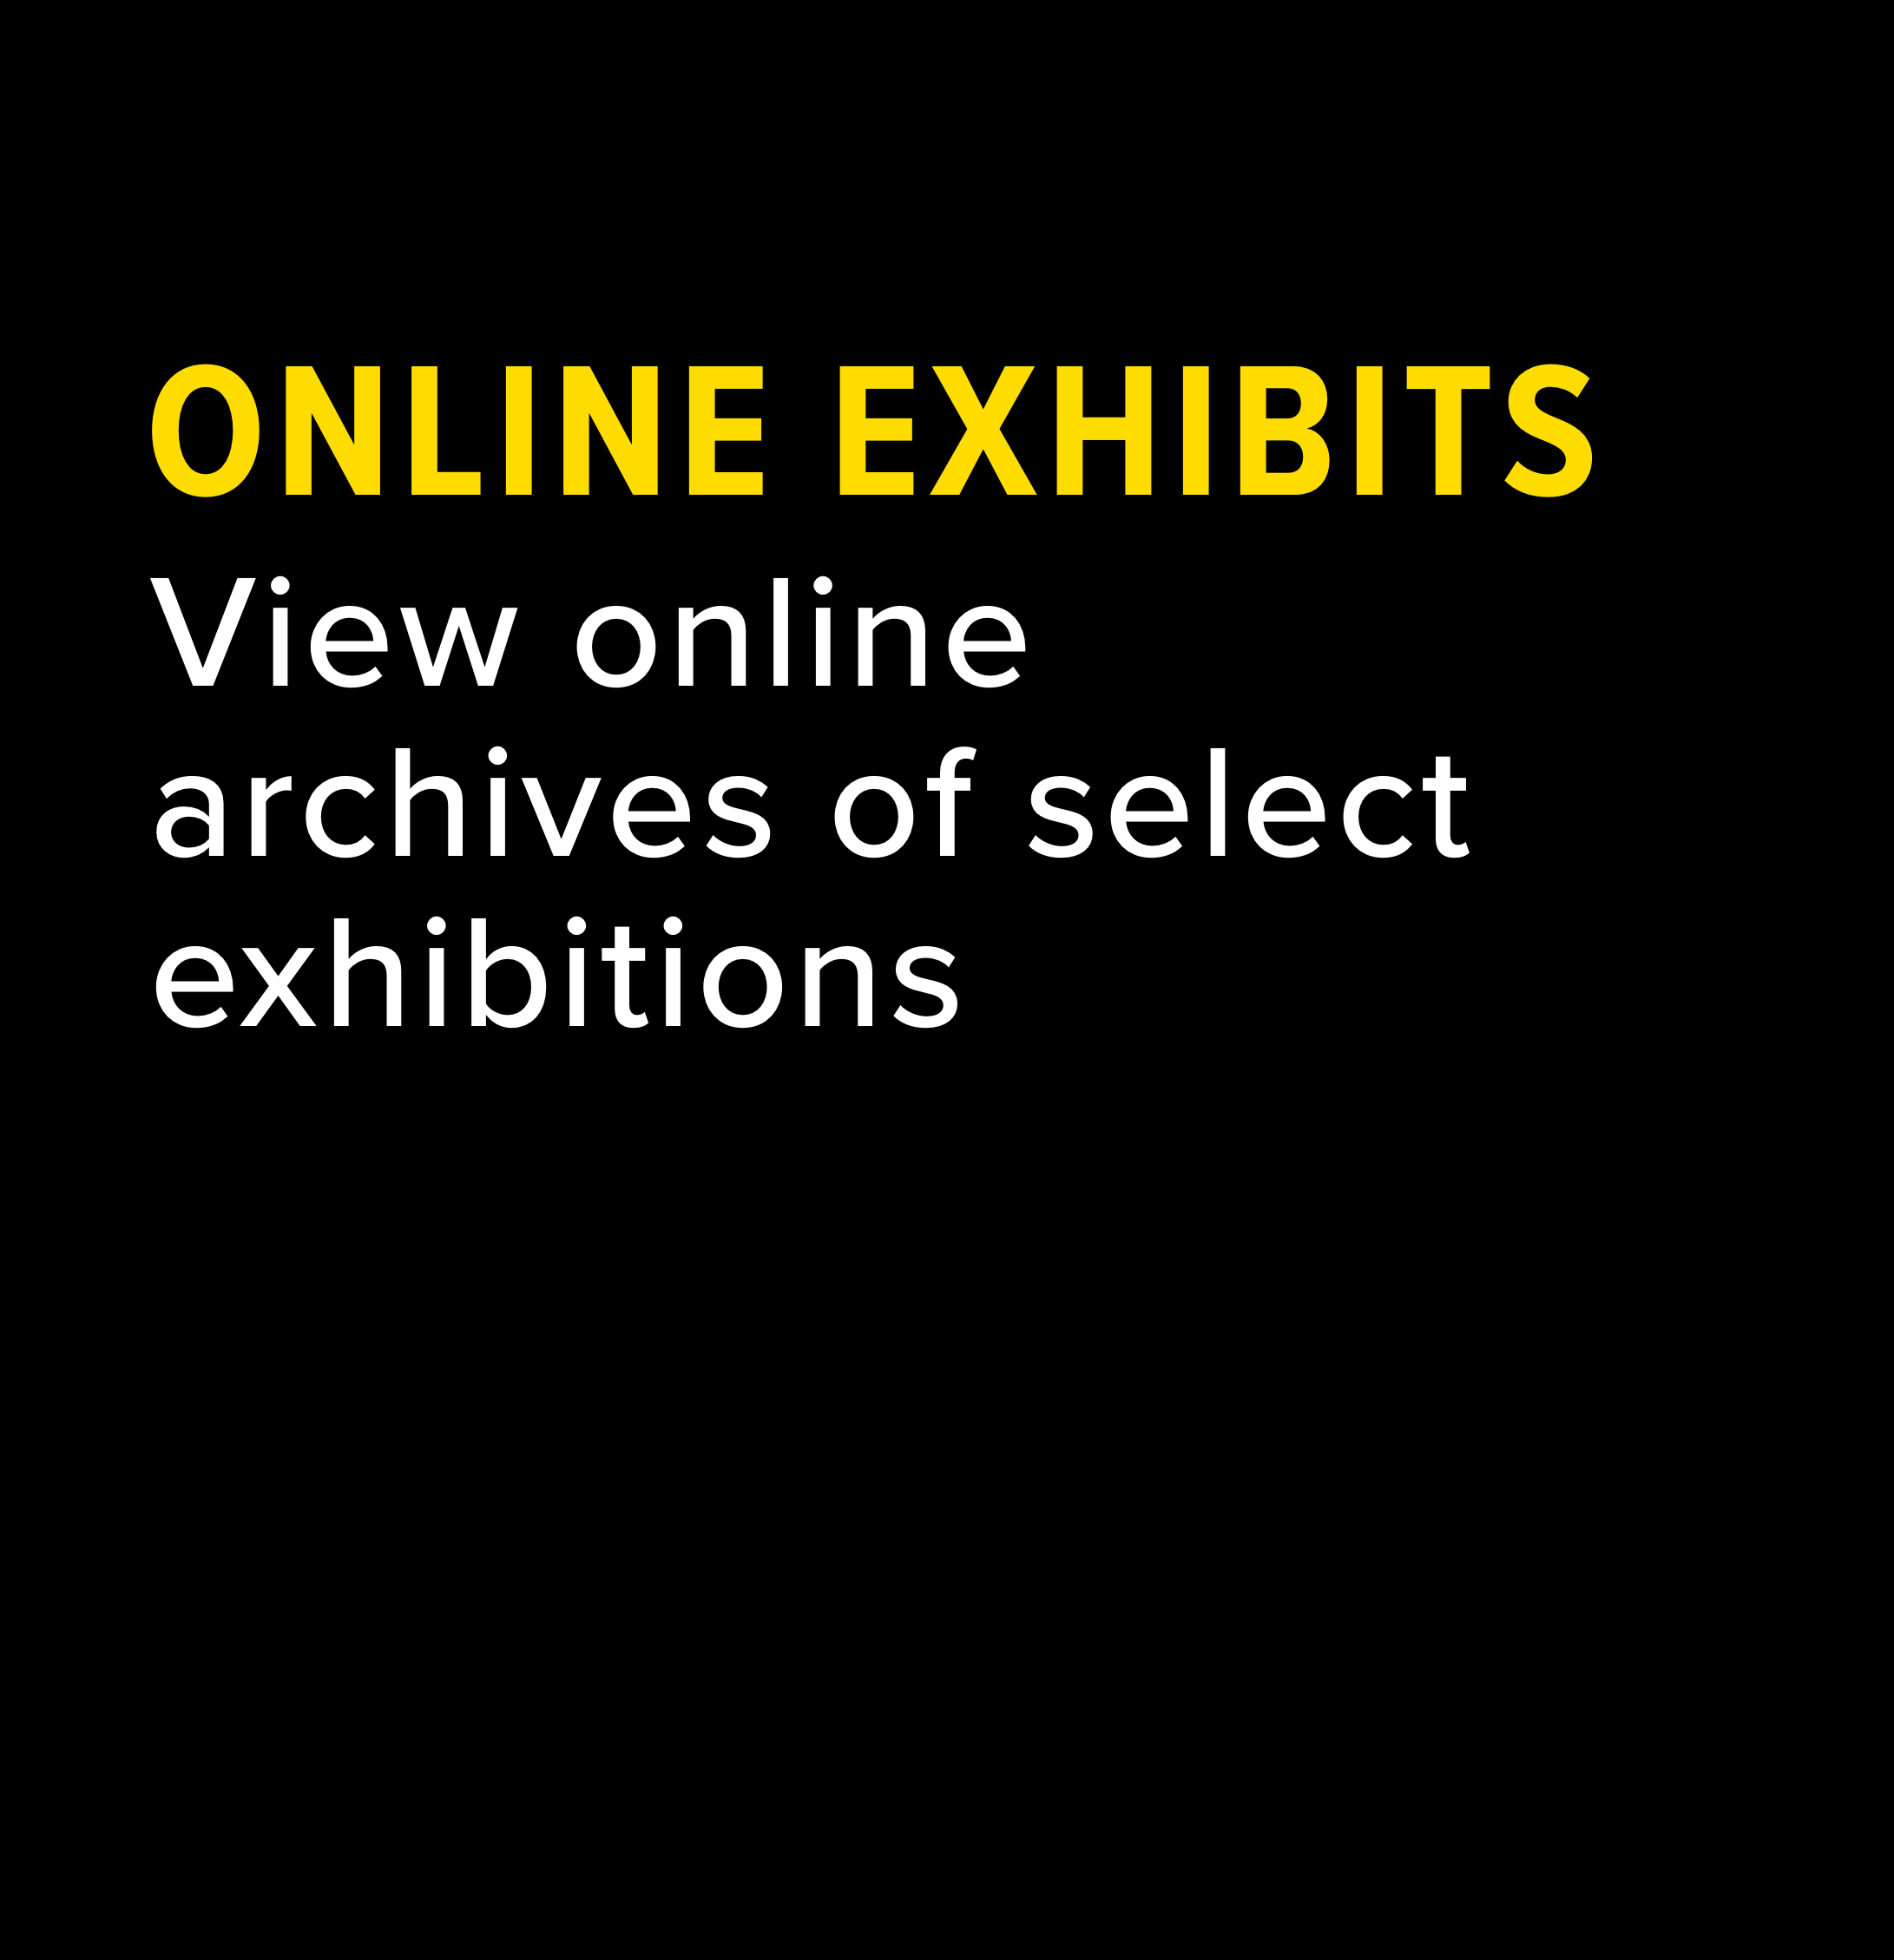 View online archives of select exhibitions